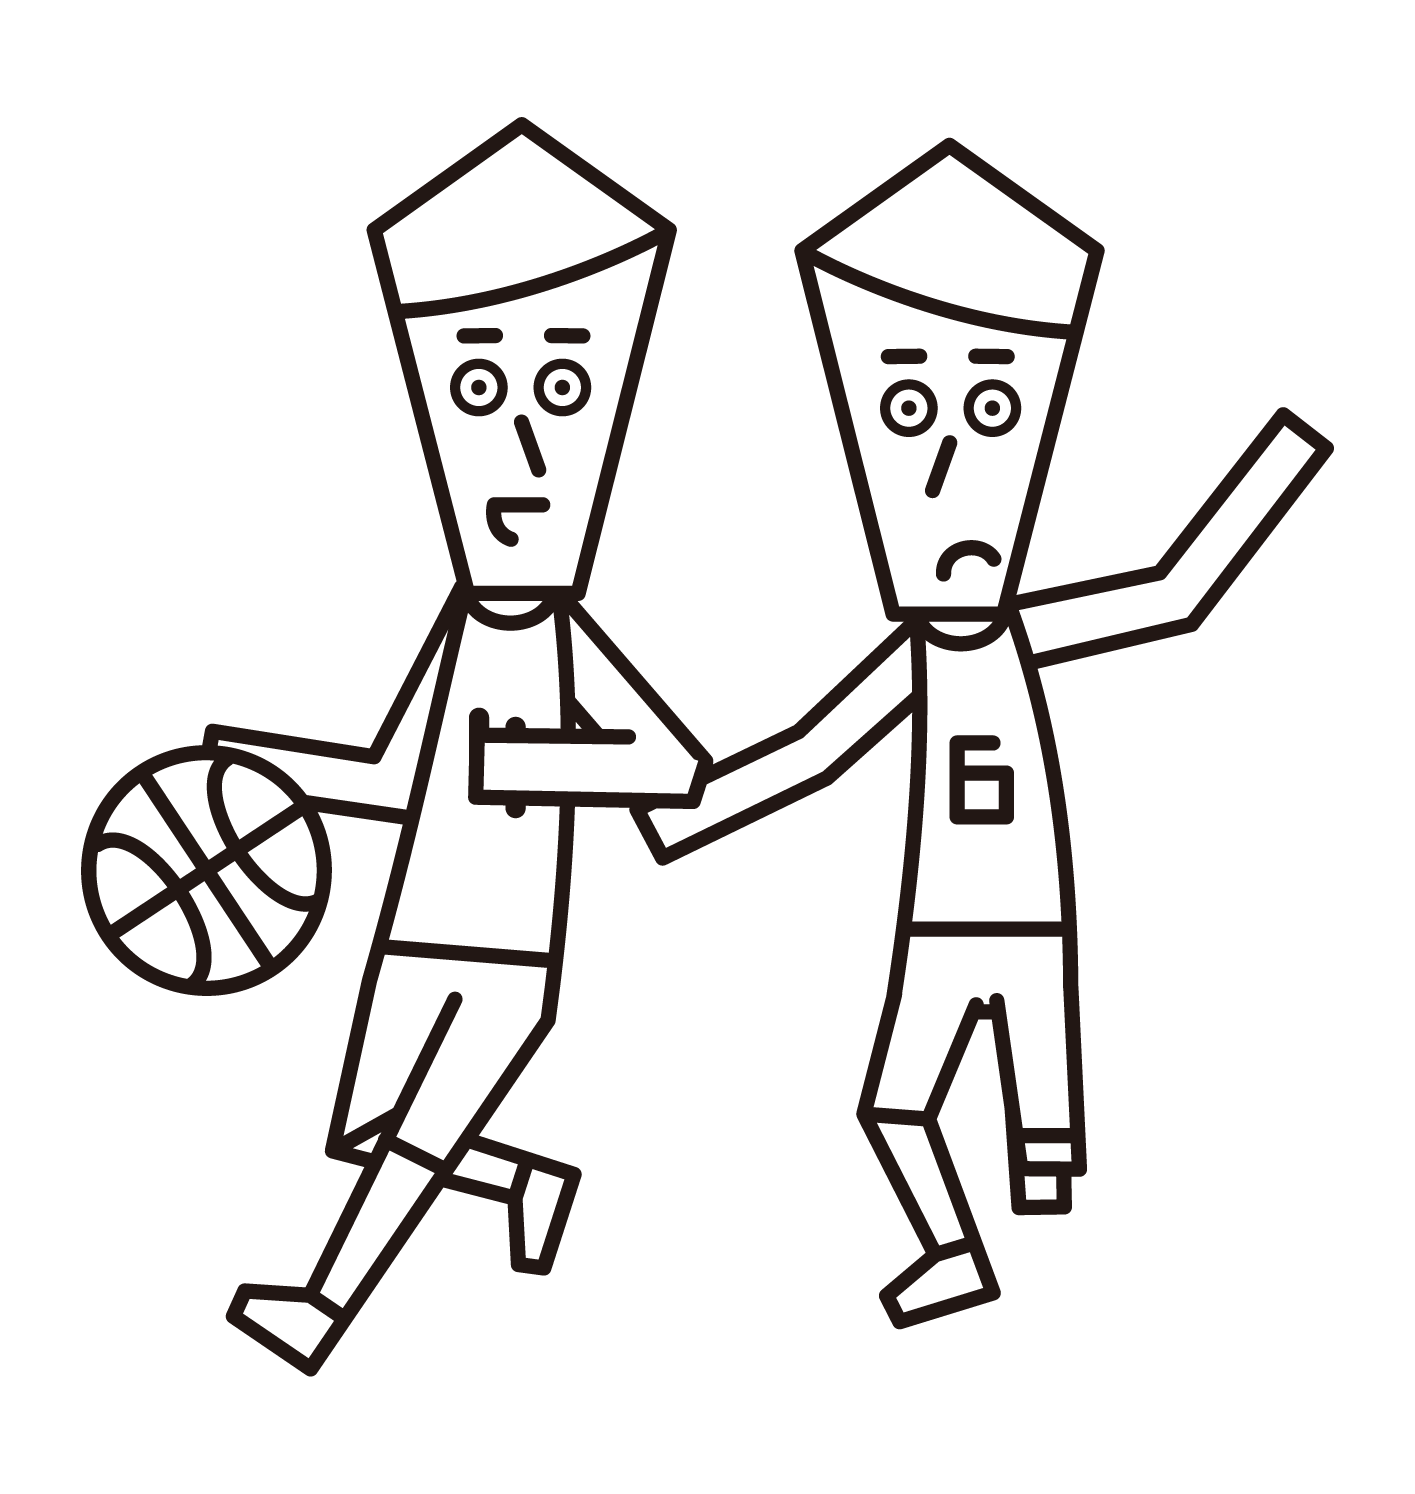 Illustration of a dribbling player and a basketball player (male) defending